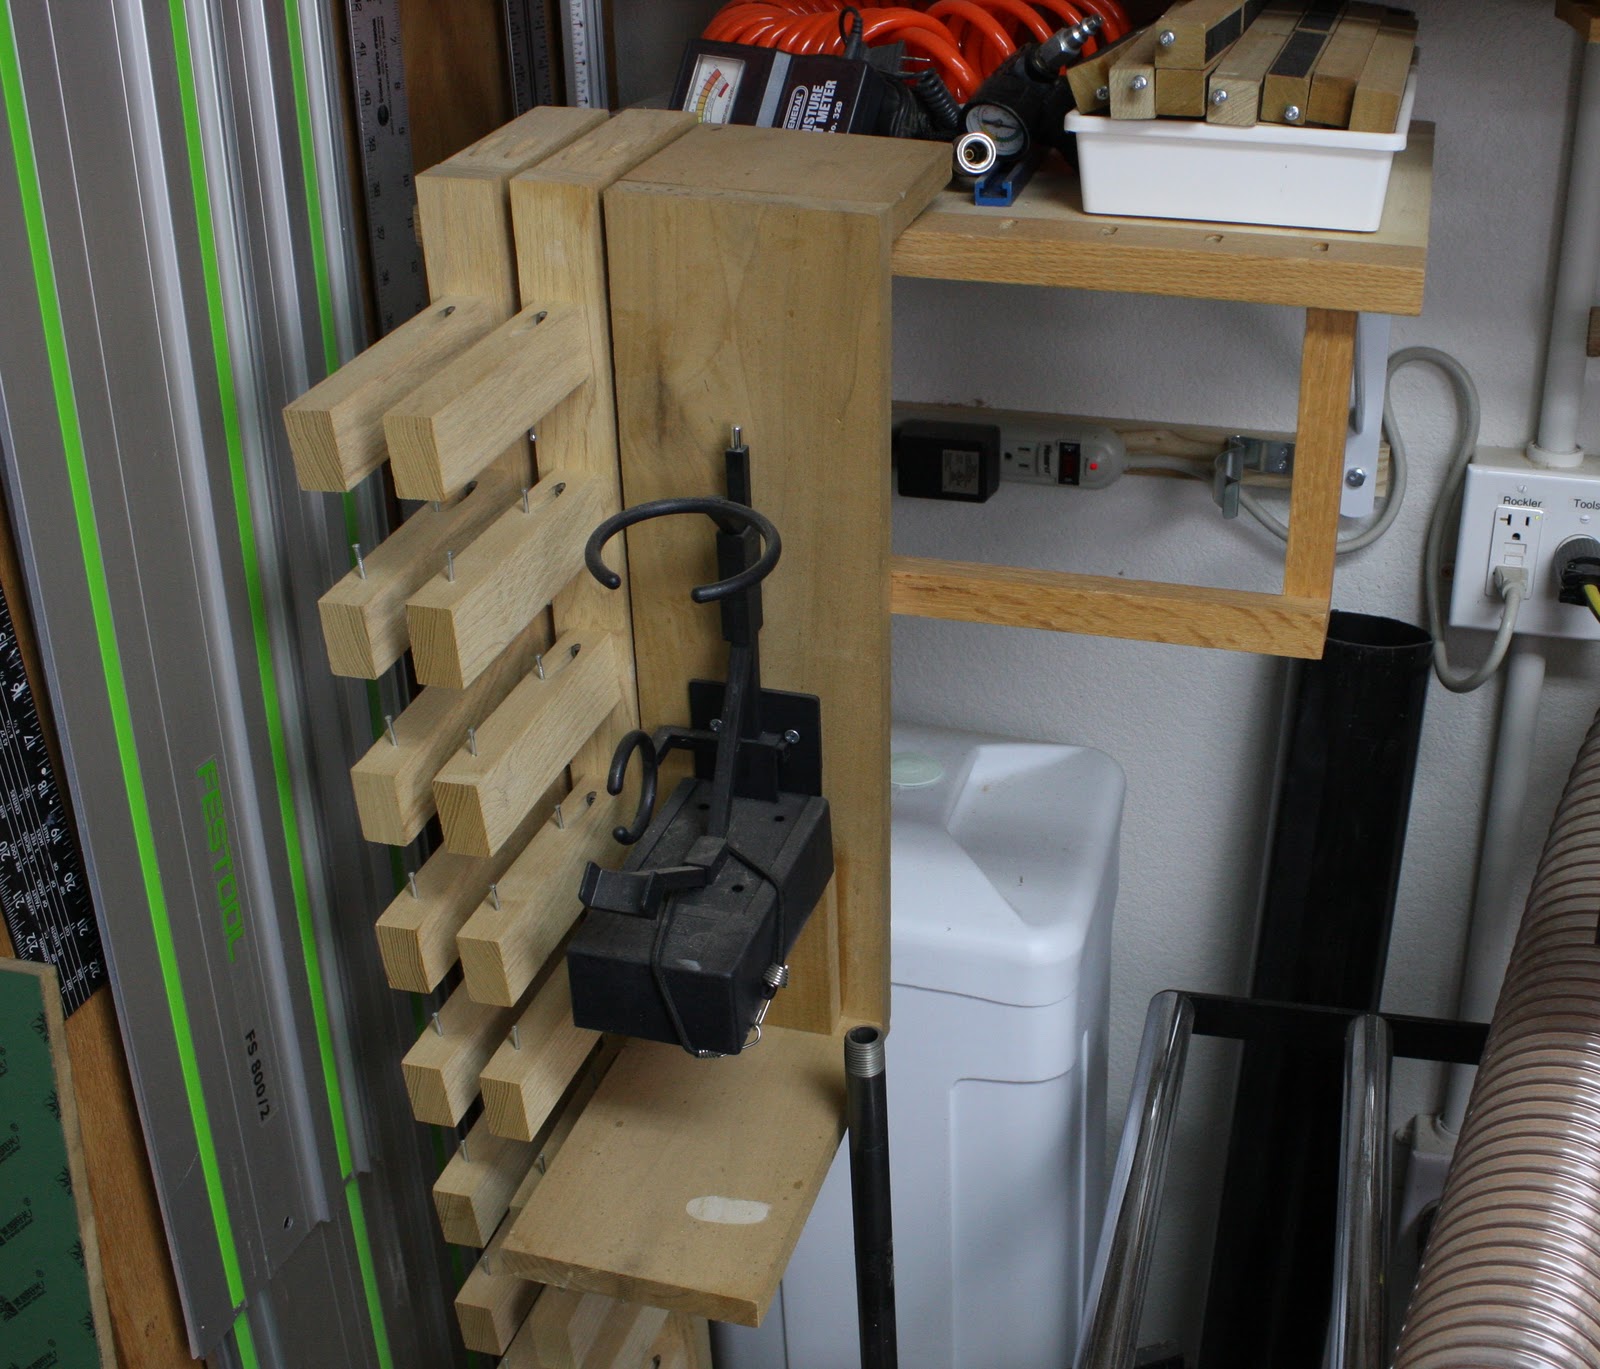 Other Uses For The Domino Half Inch Shy, Festool Domino Floating Shelves